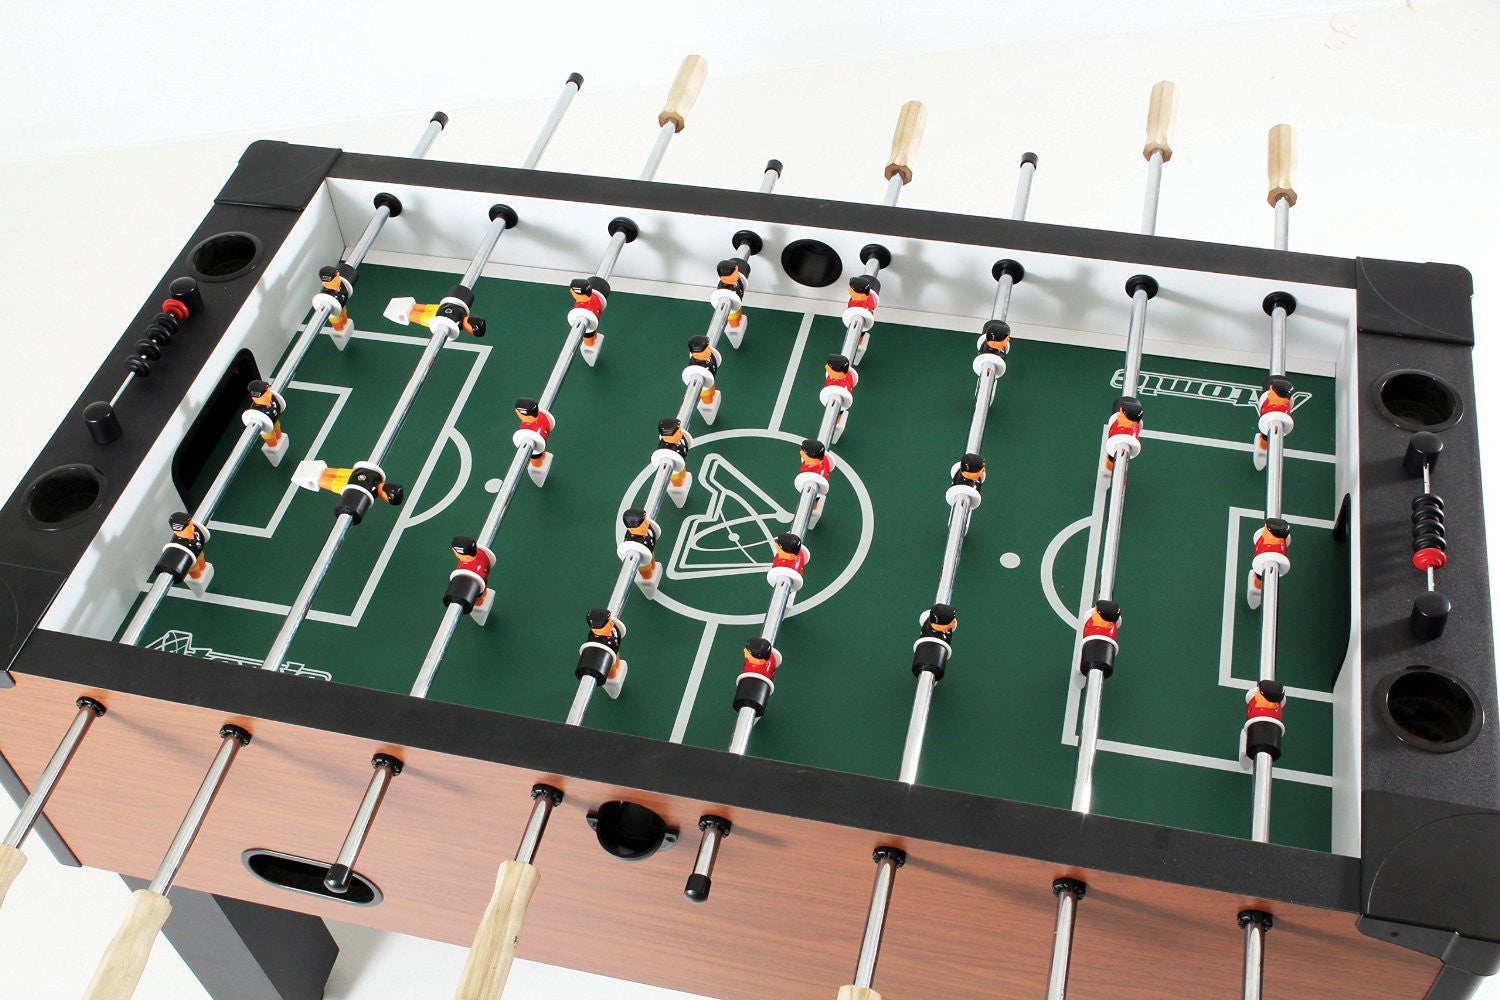 Players on a Atomic Gladiator Foosball Table by DMI Sports available at Foosball Planet.